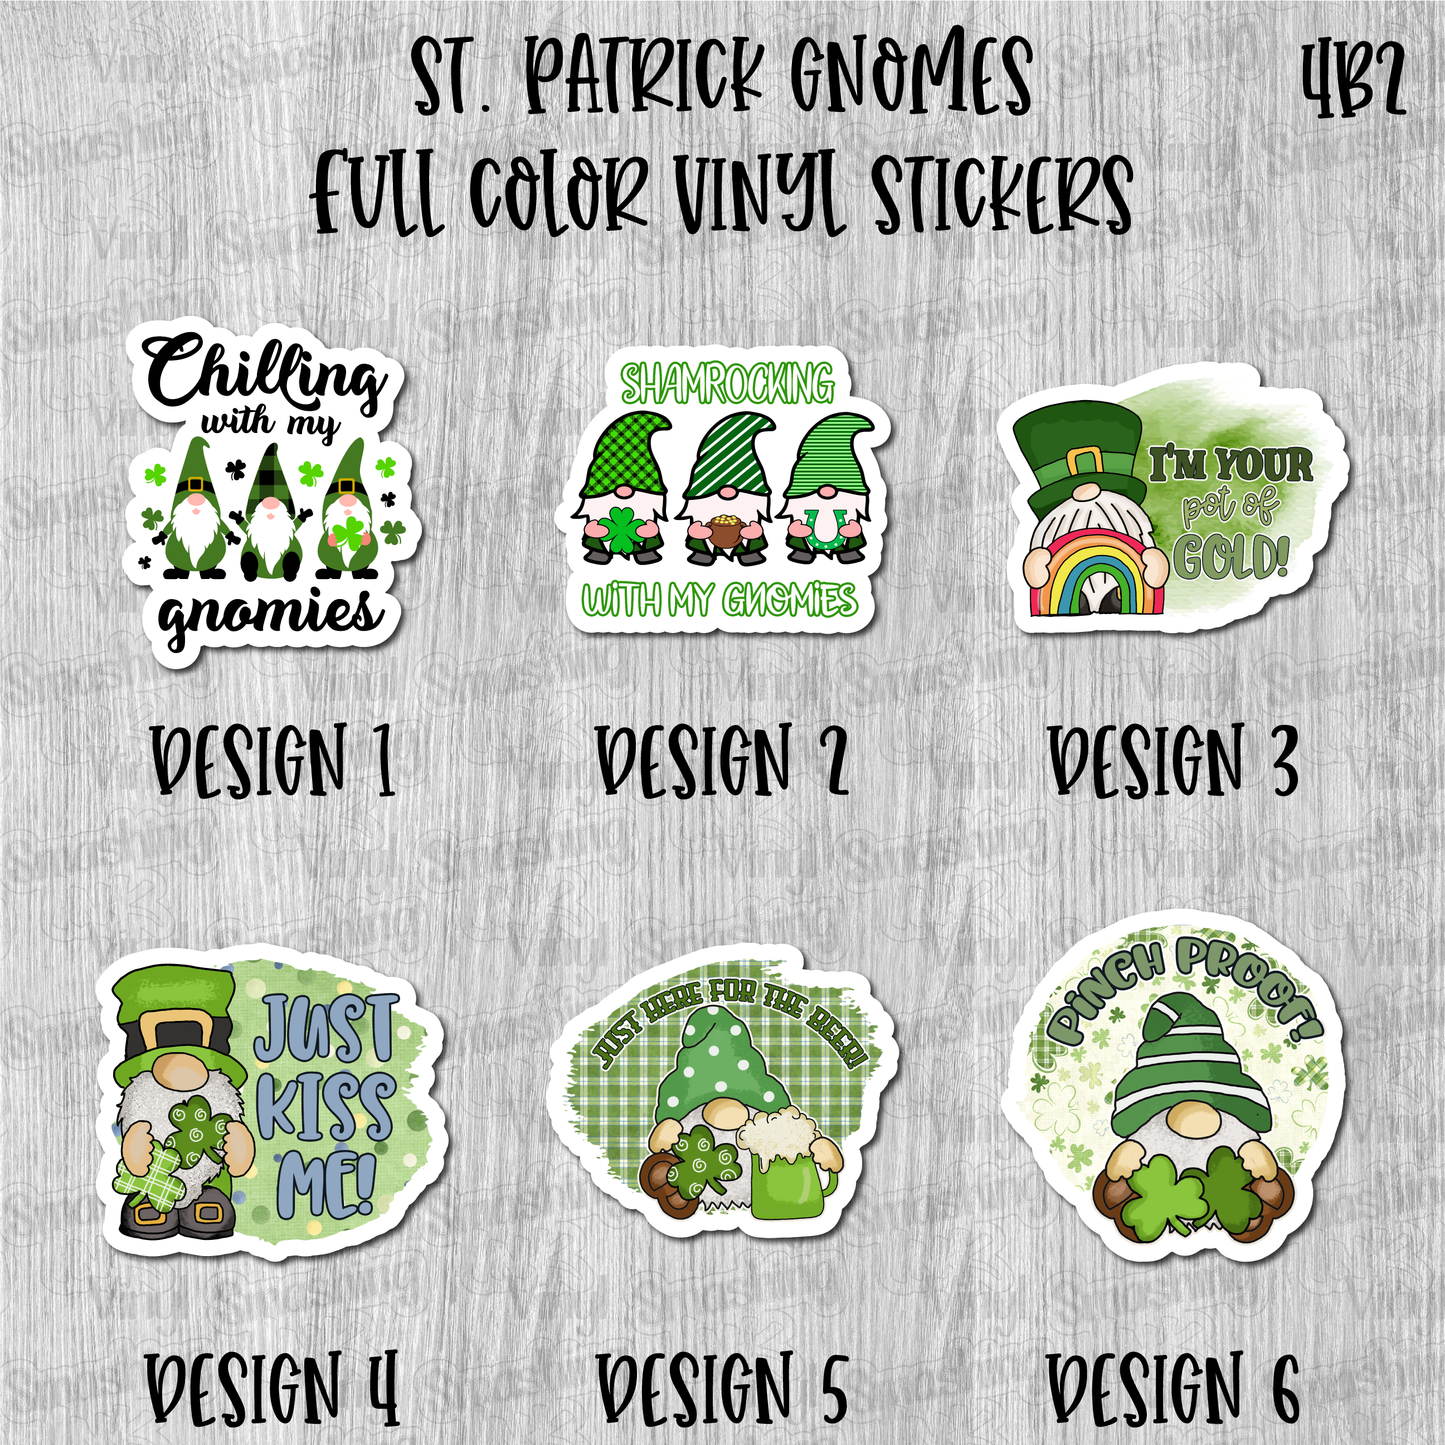 St. Patrick Gnomes - Full Color Vinyl Stickers (SHIPS IN 3-7 BUS DAYS)